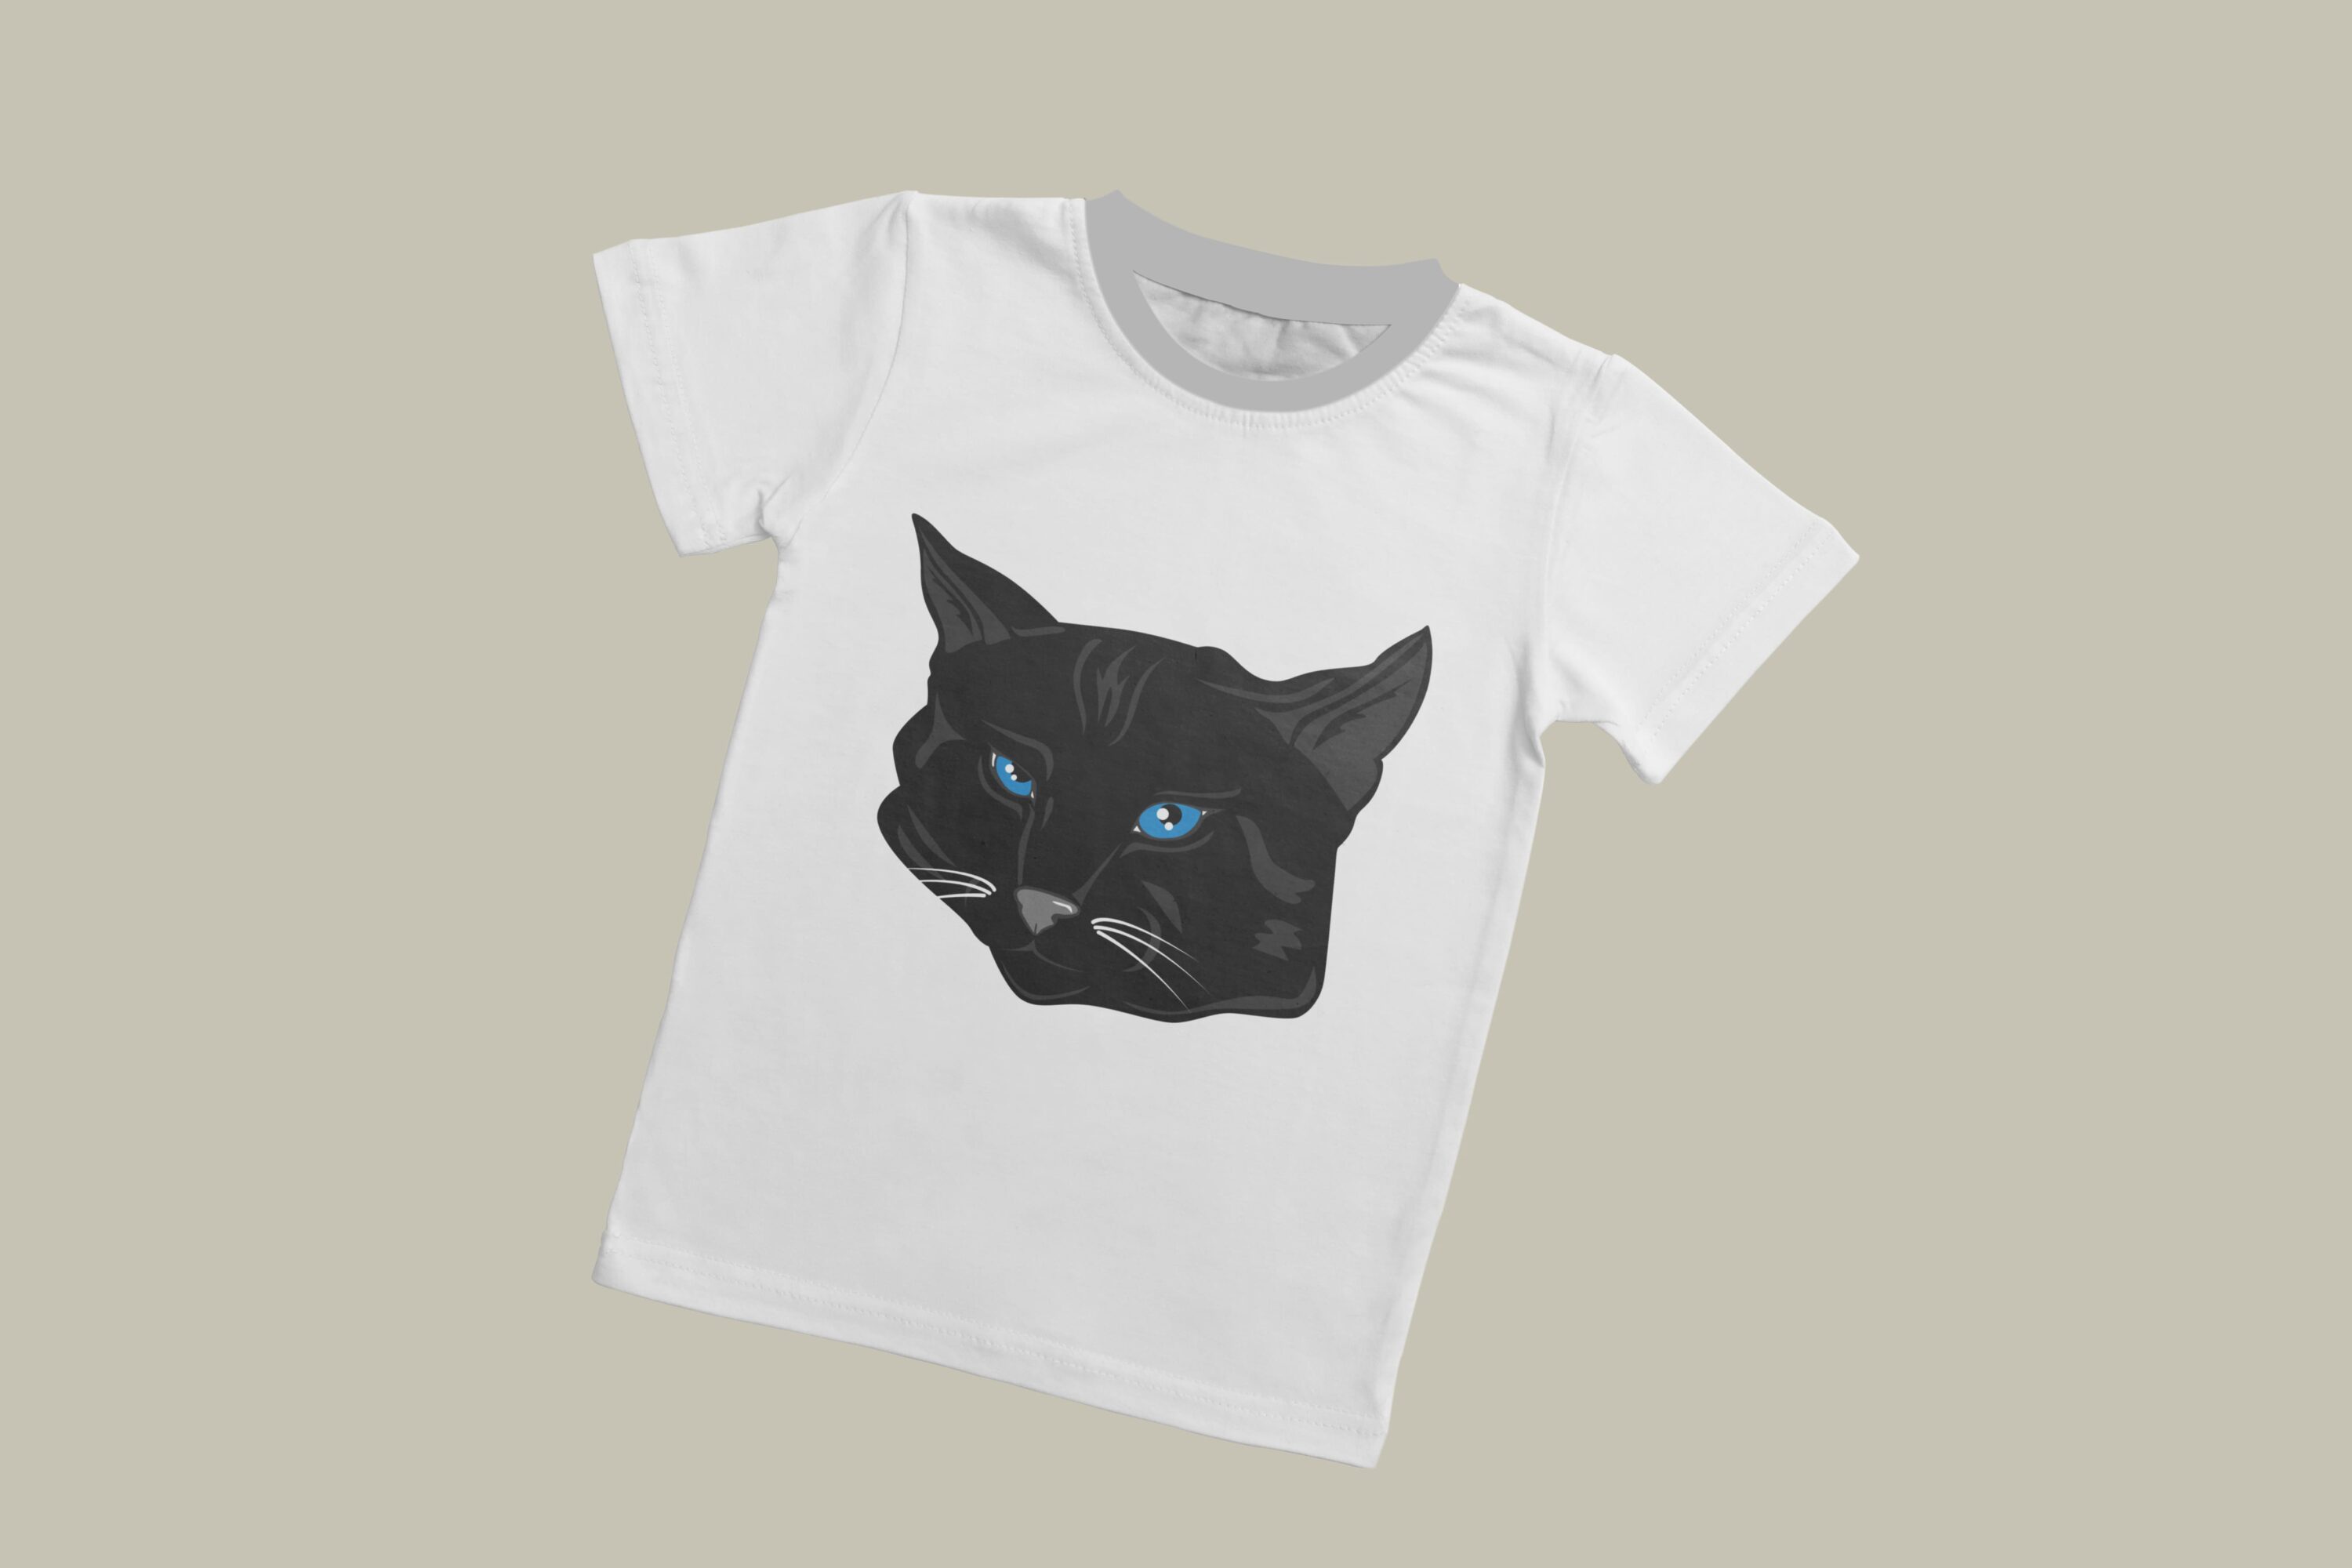 A white T-shirt with a grey collar and the face of a black cat with blue eyes on a grey background.